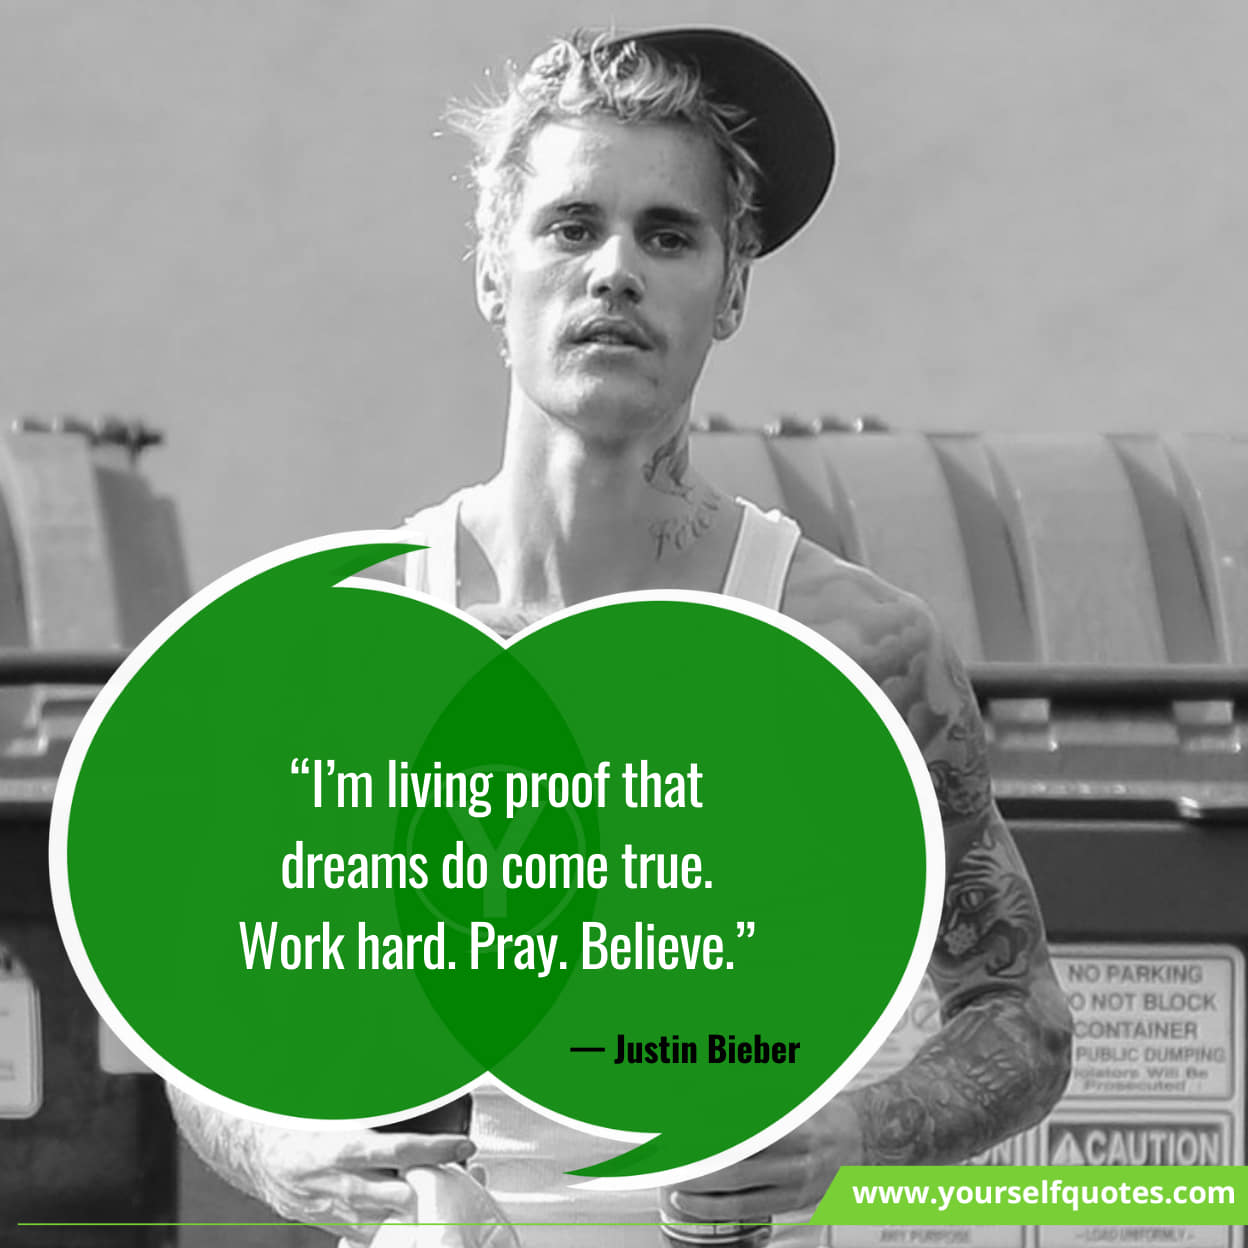 Justin Bieber Quotes About Dreams